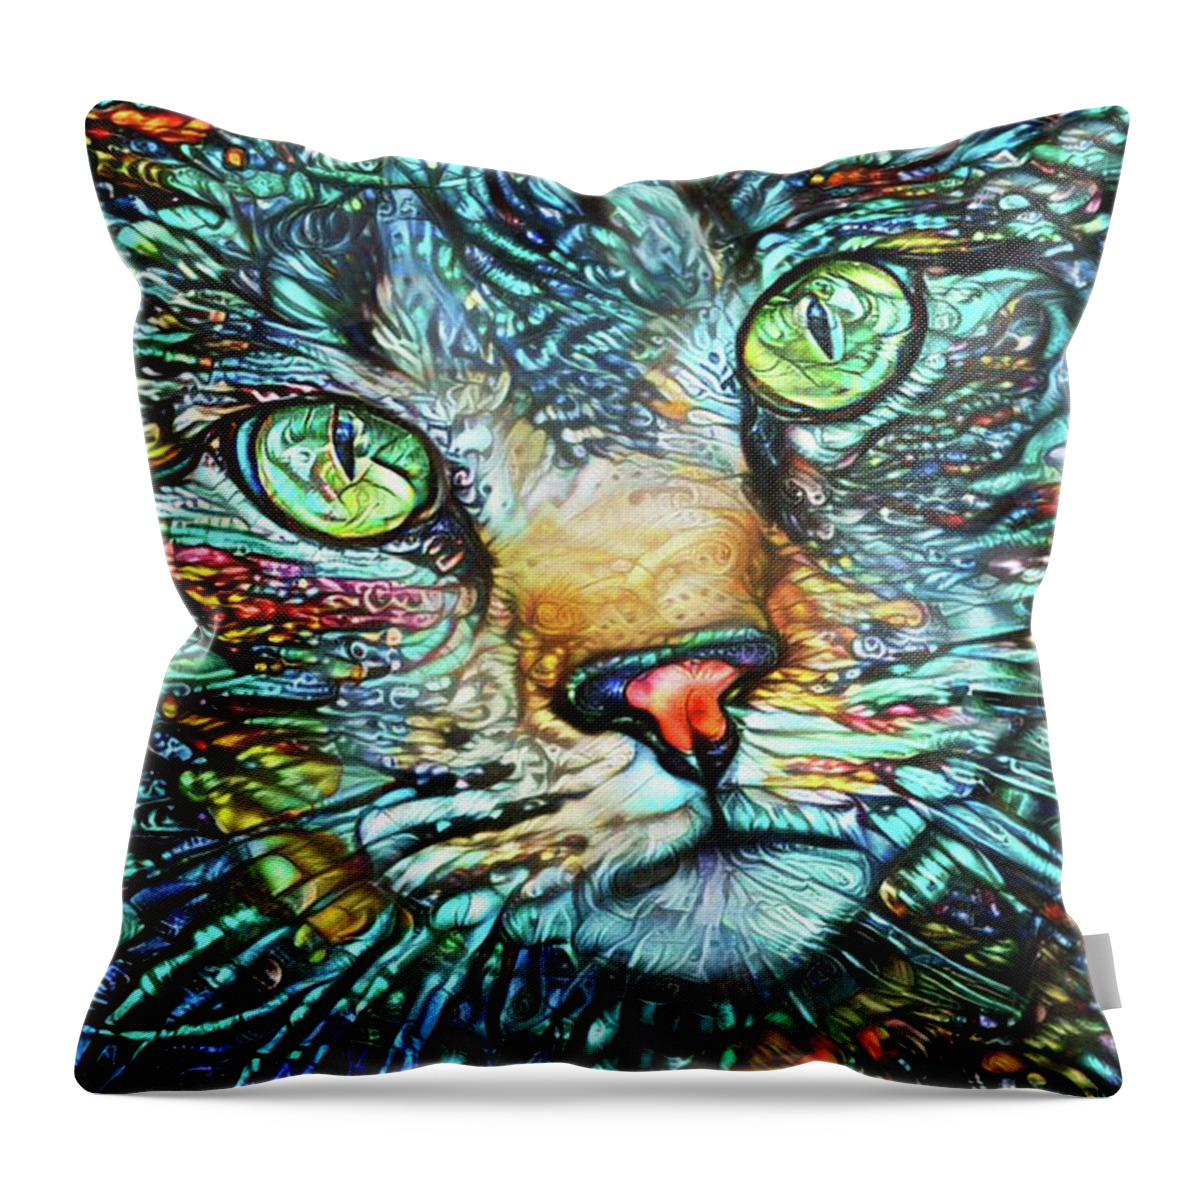 Tabby Cat Throw Pillow featuring the digital art Moe the Colorful Tabby Cat by Peggy Collins